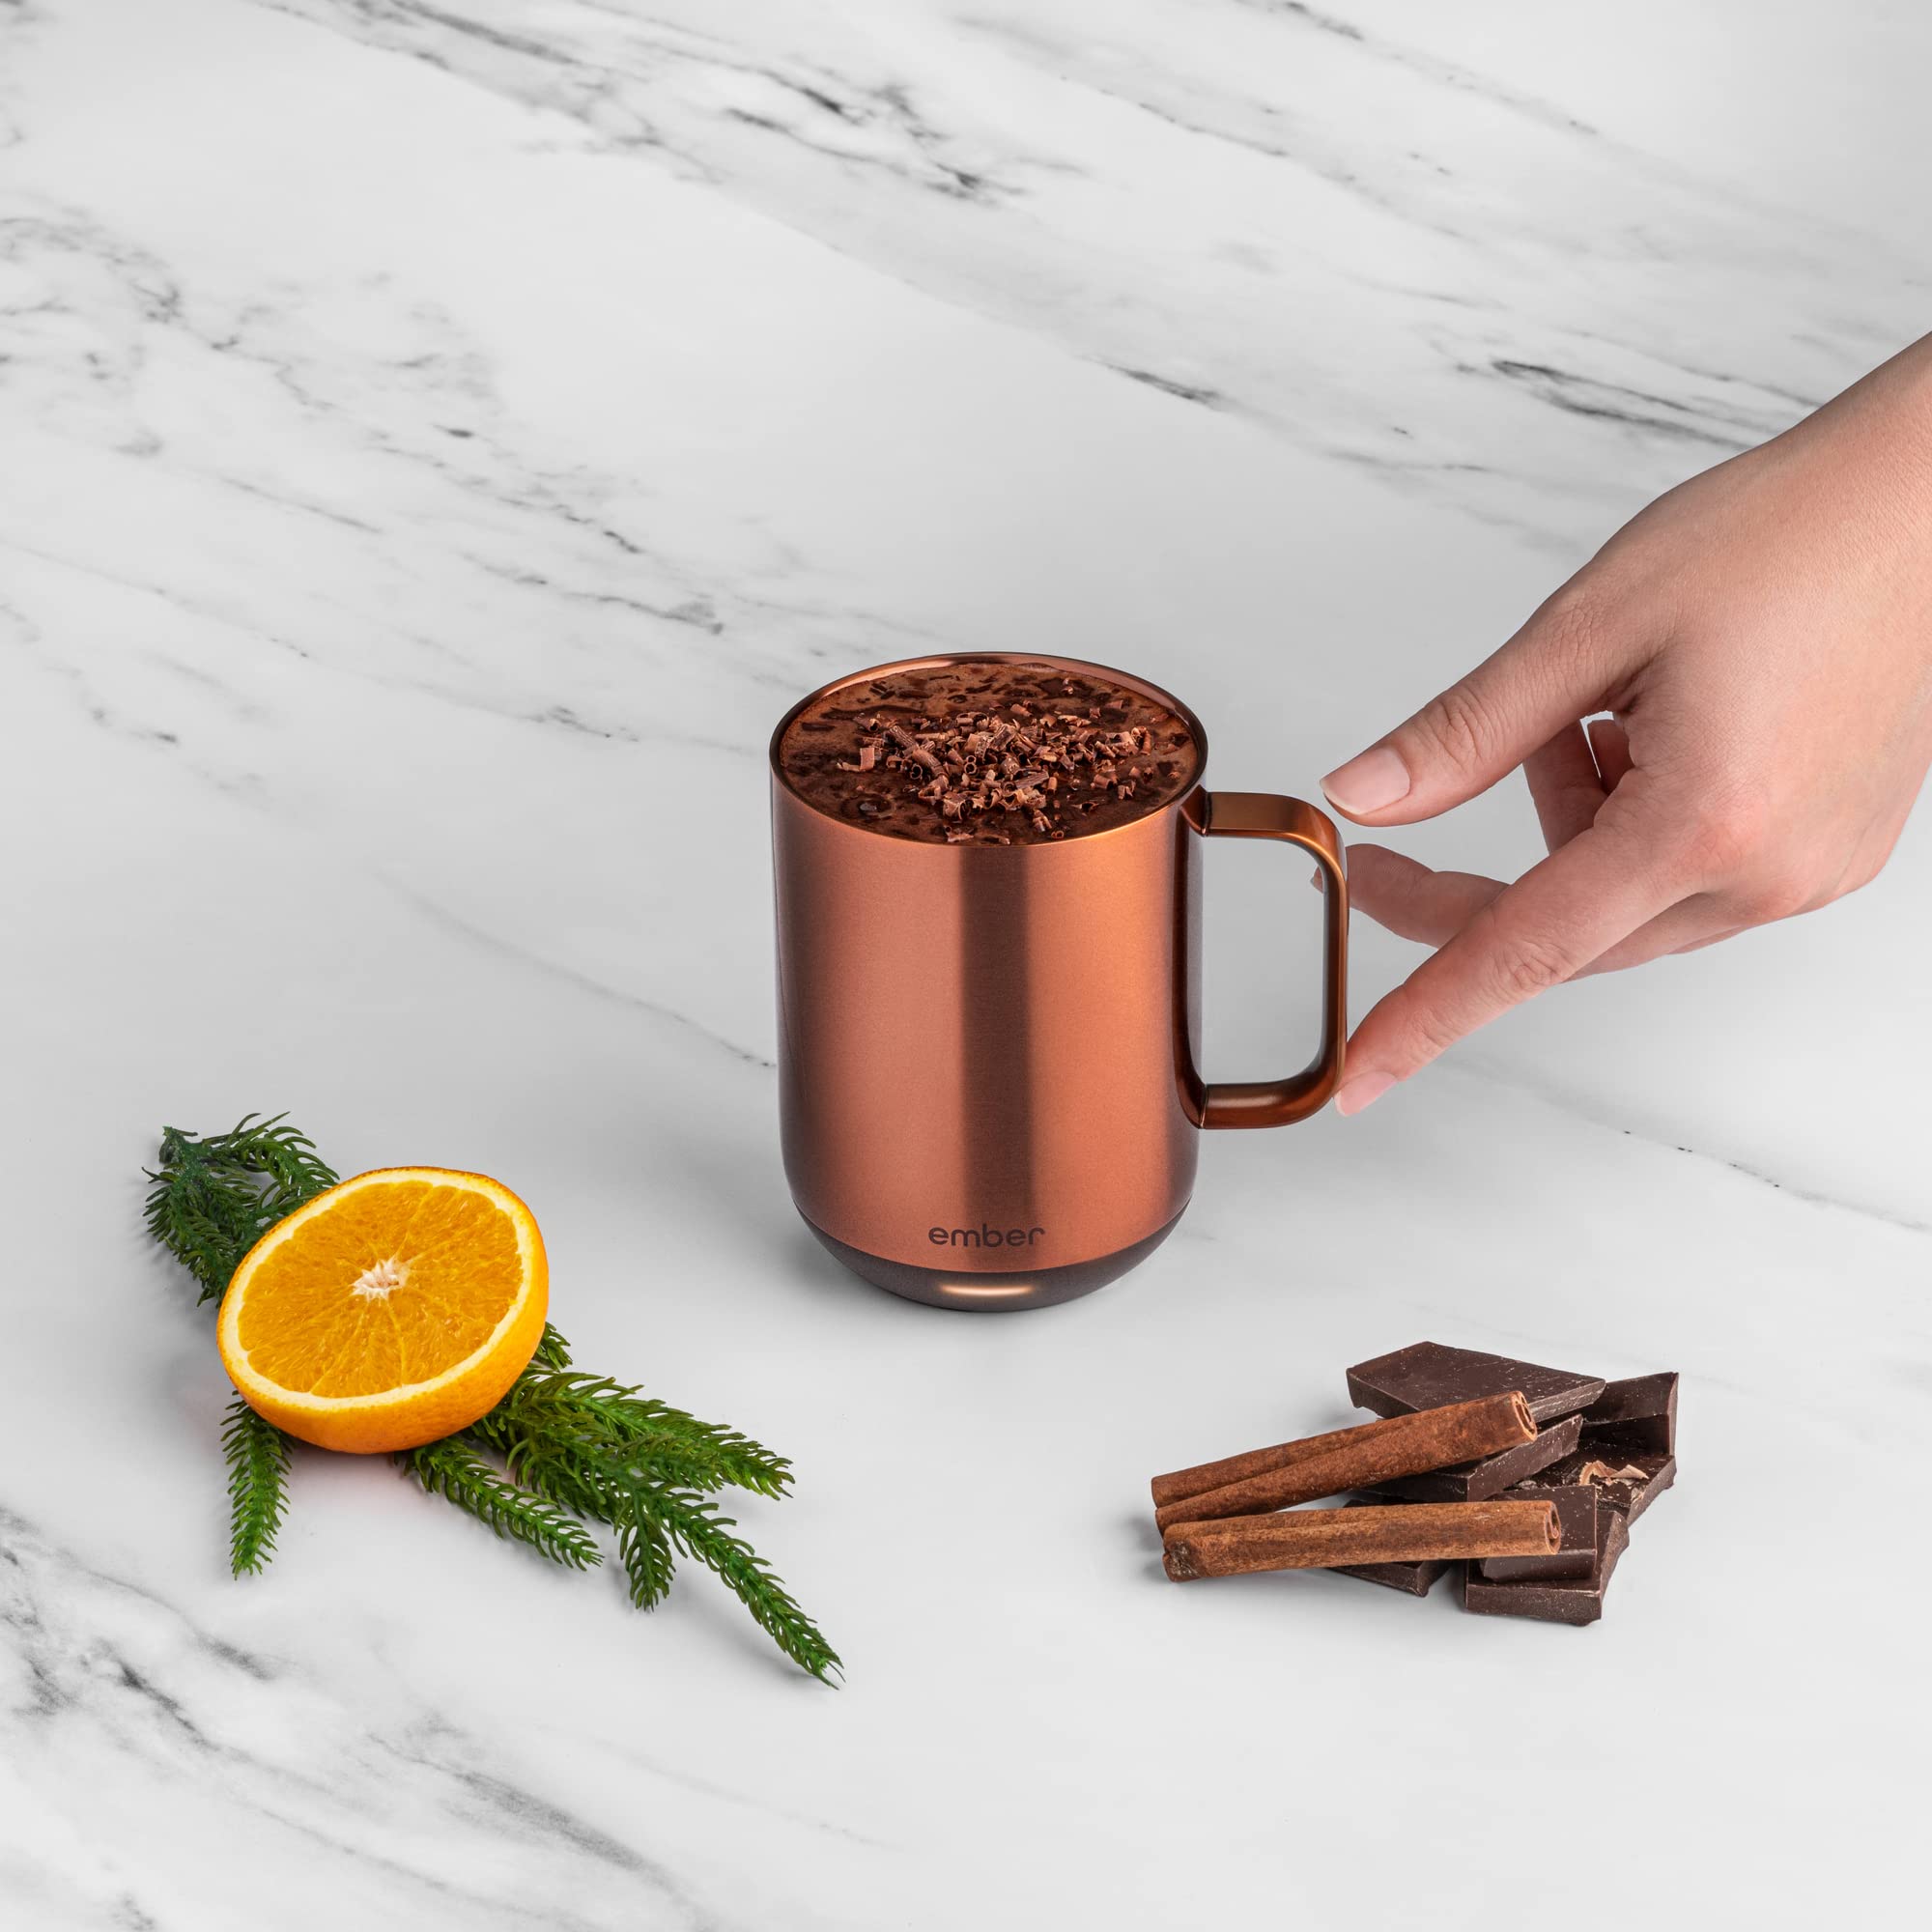 Ember Temperature Control Smart Mug 2, 10 Oz, App-Controlled Heated Coffee Mug with 80 Min Battery Life and Improved Design, Copper